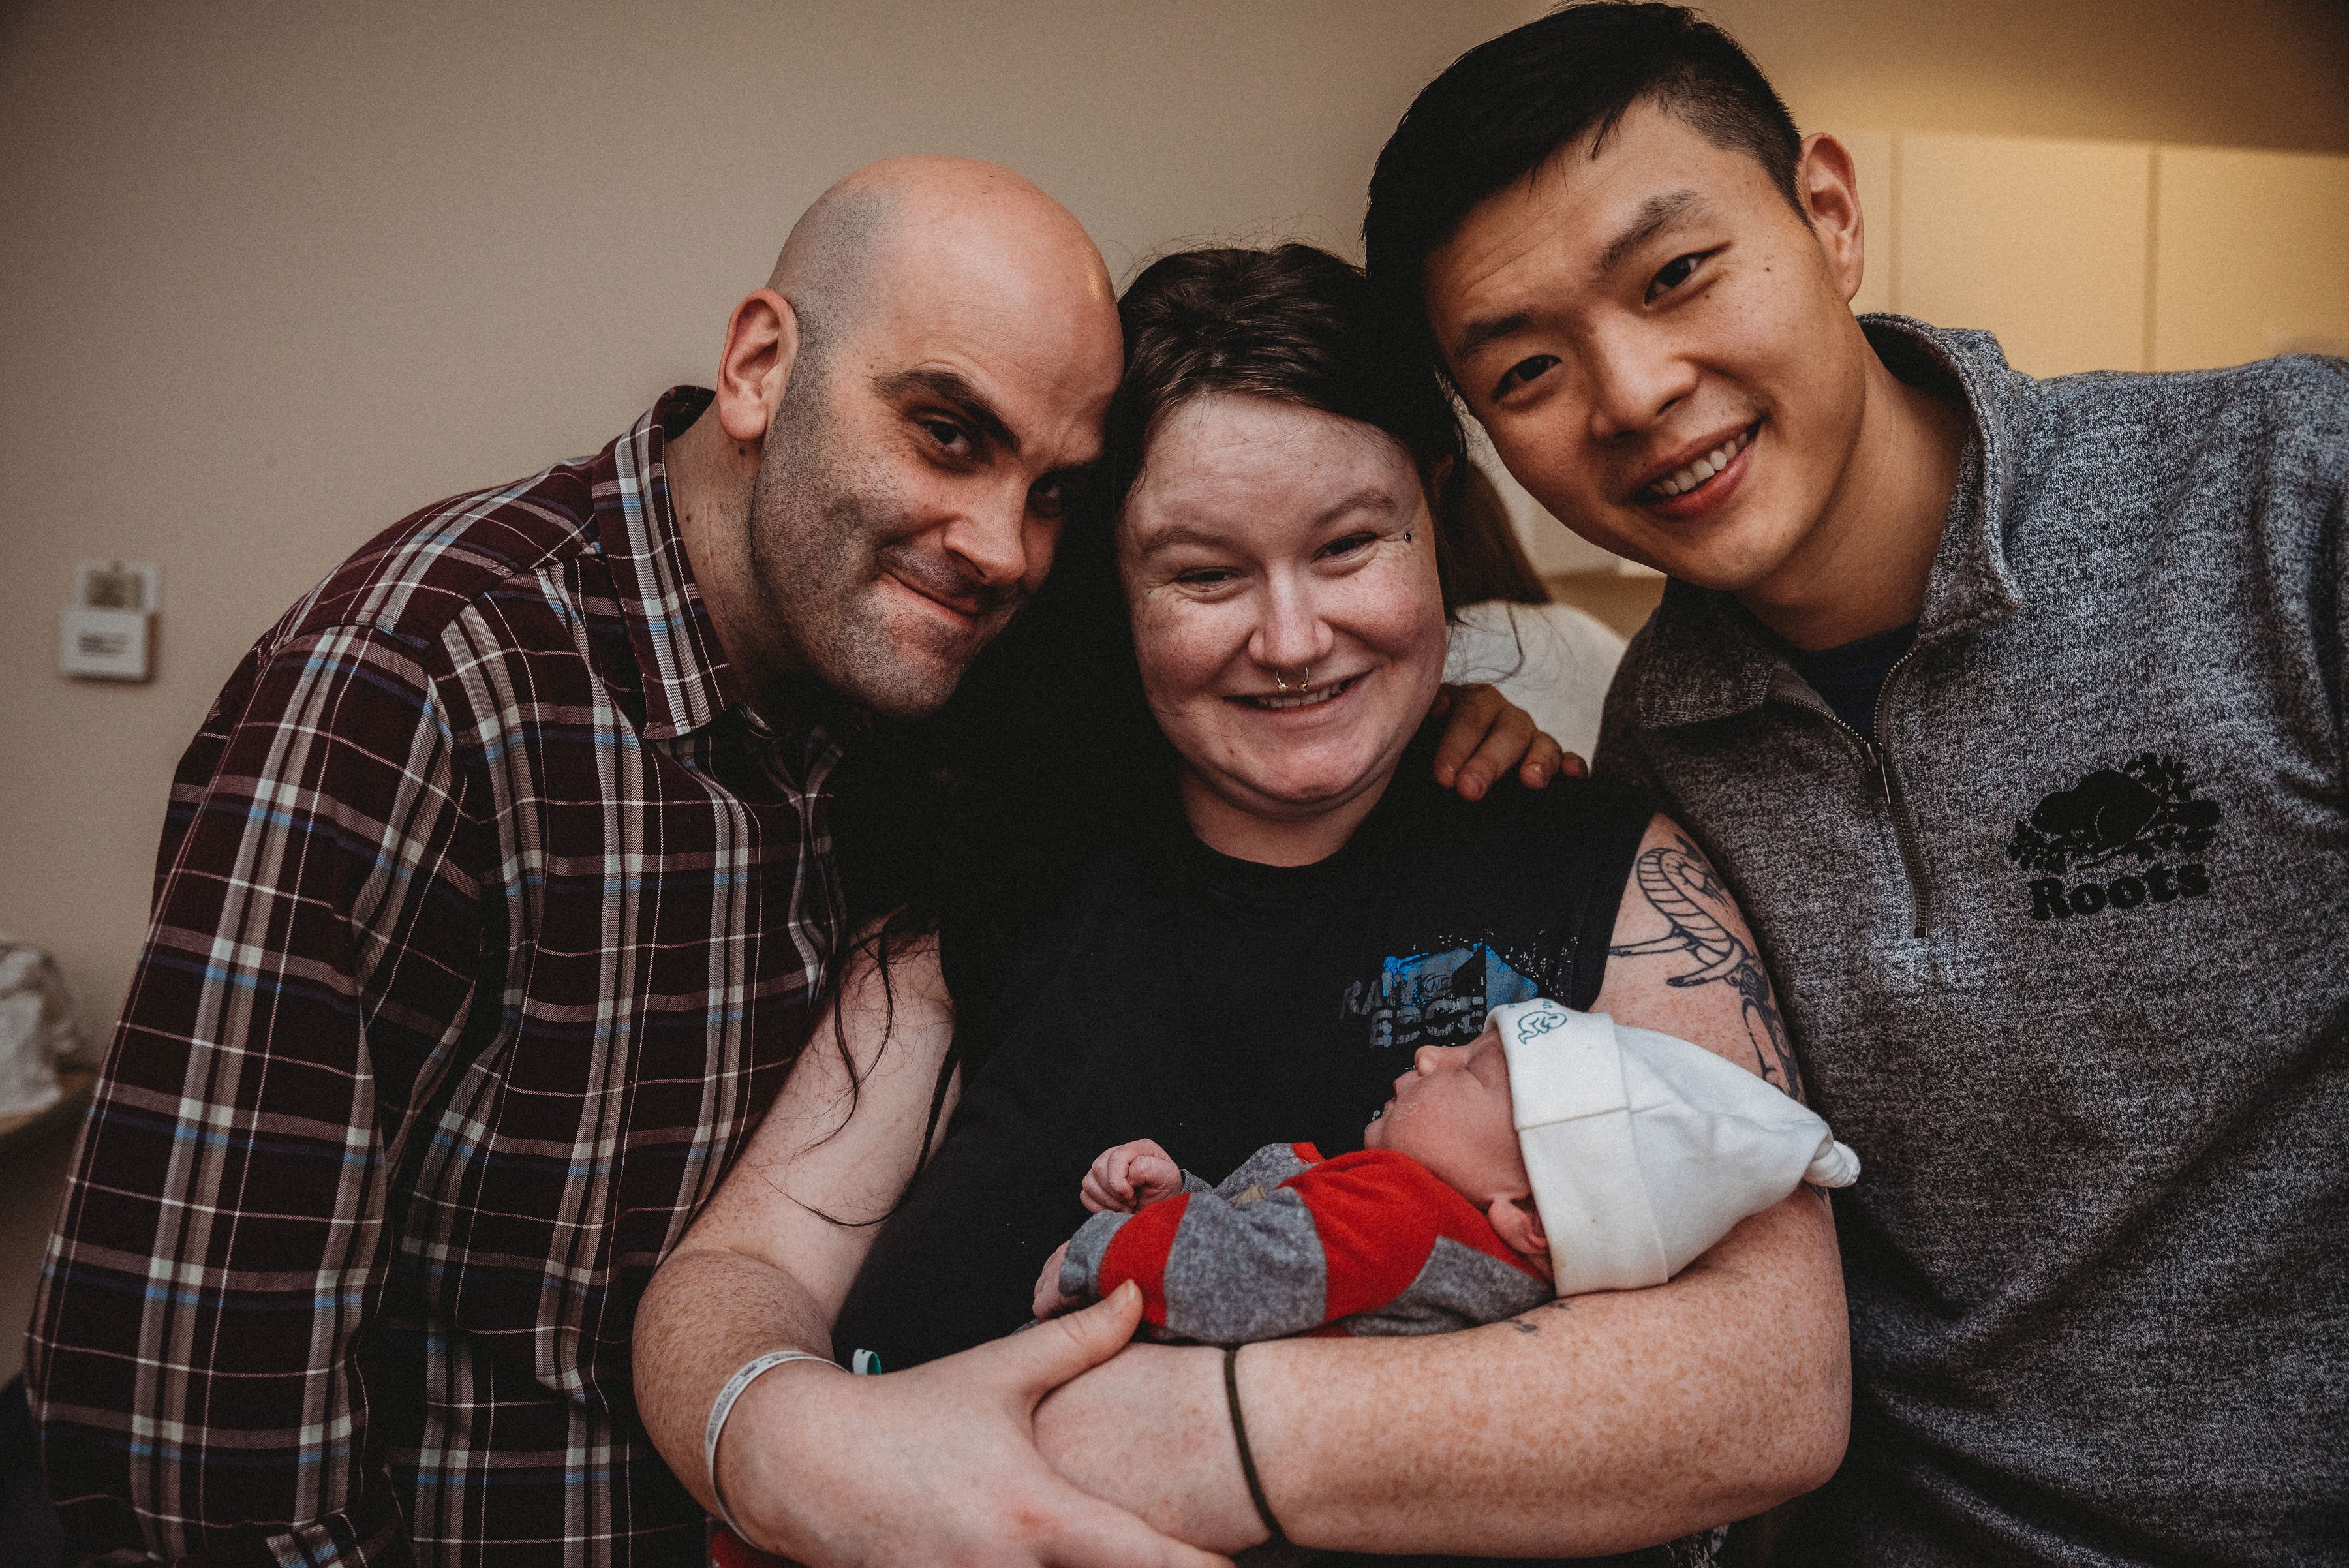 Featured image for “From Shanghai to Sudbury: An International Surrogacy Story”